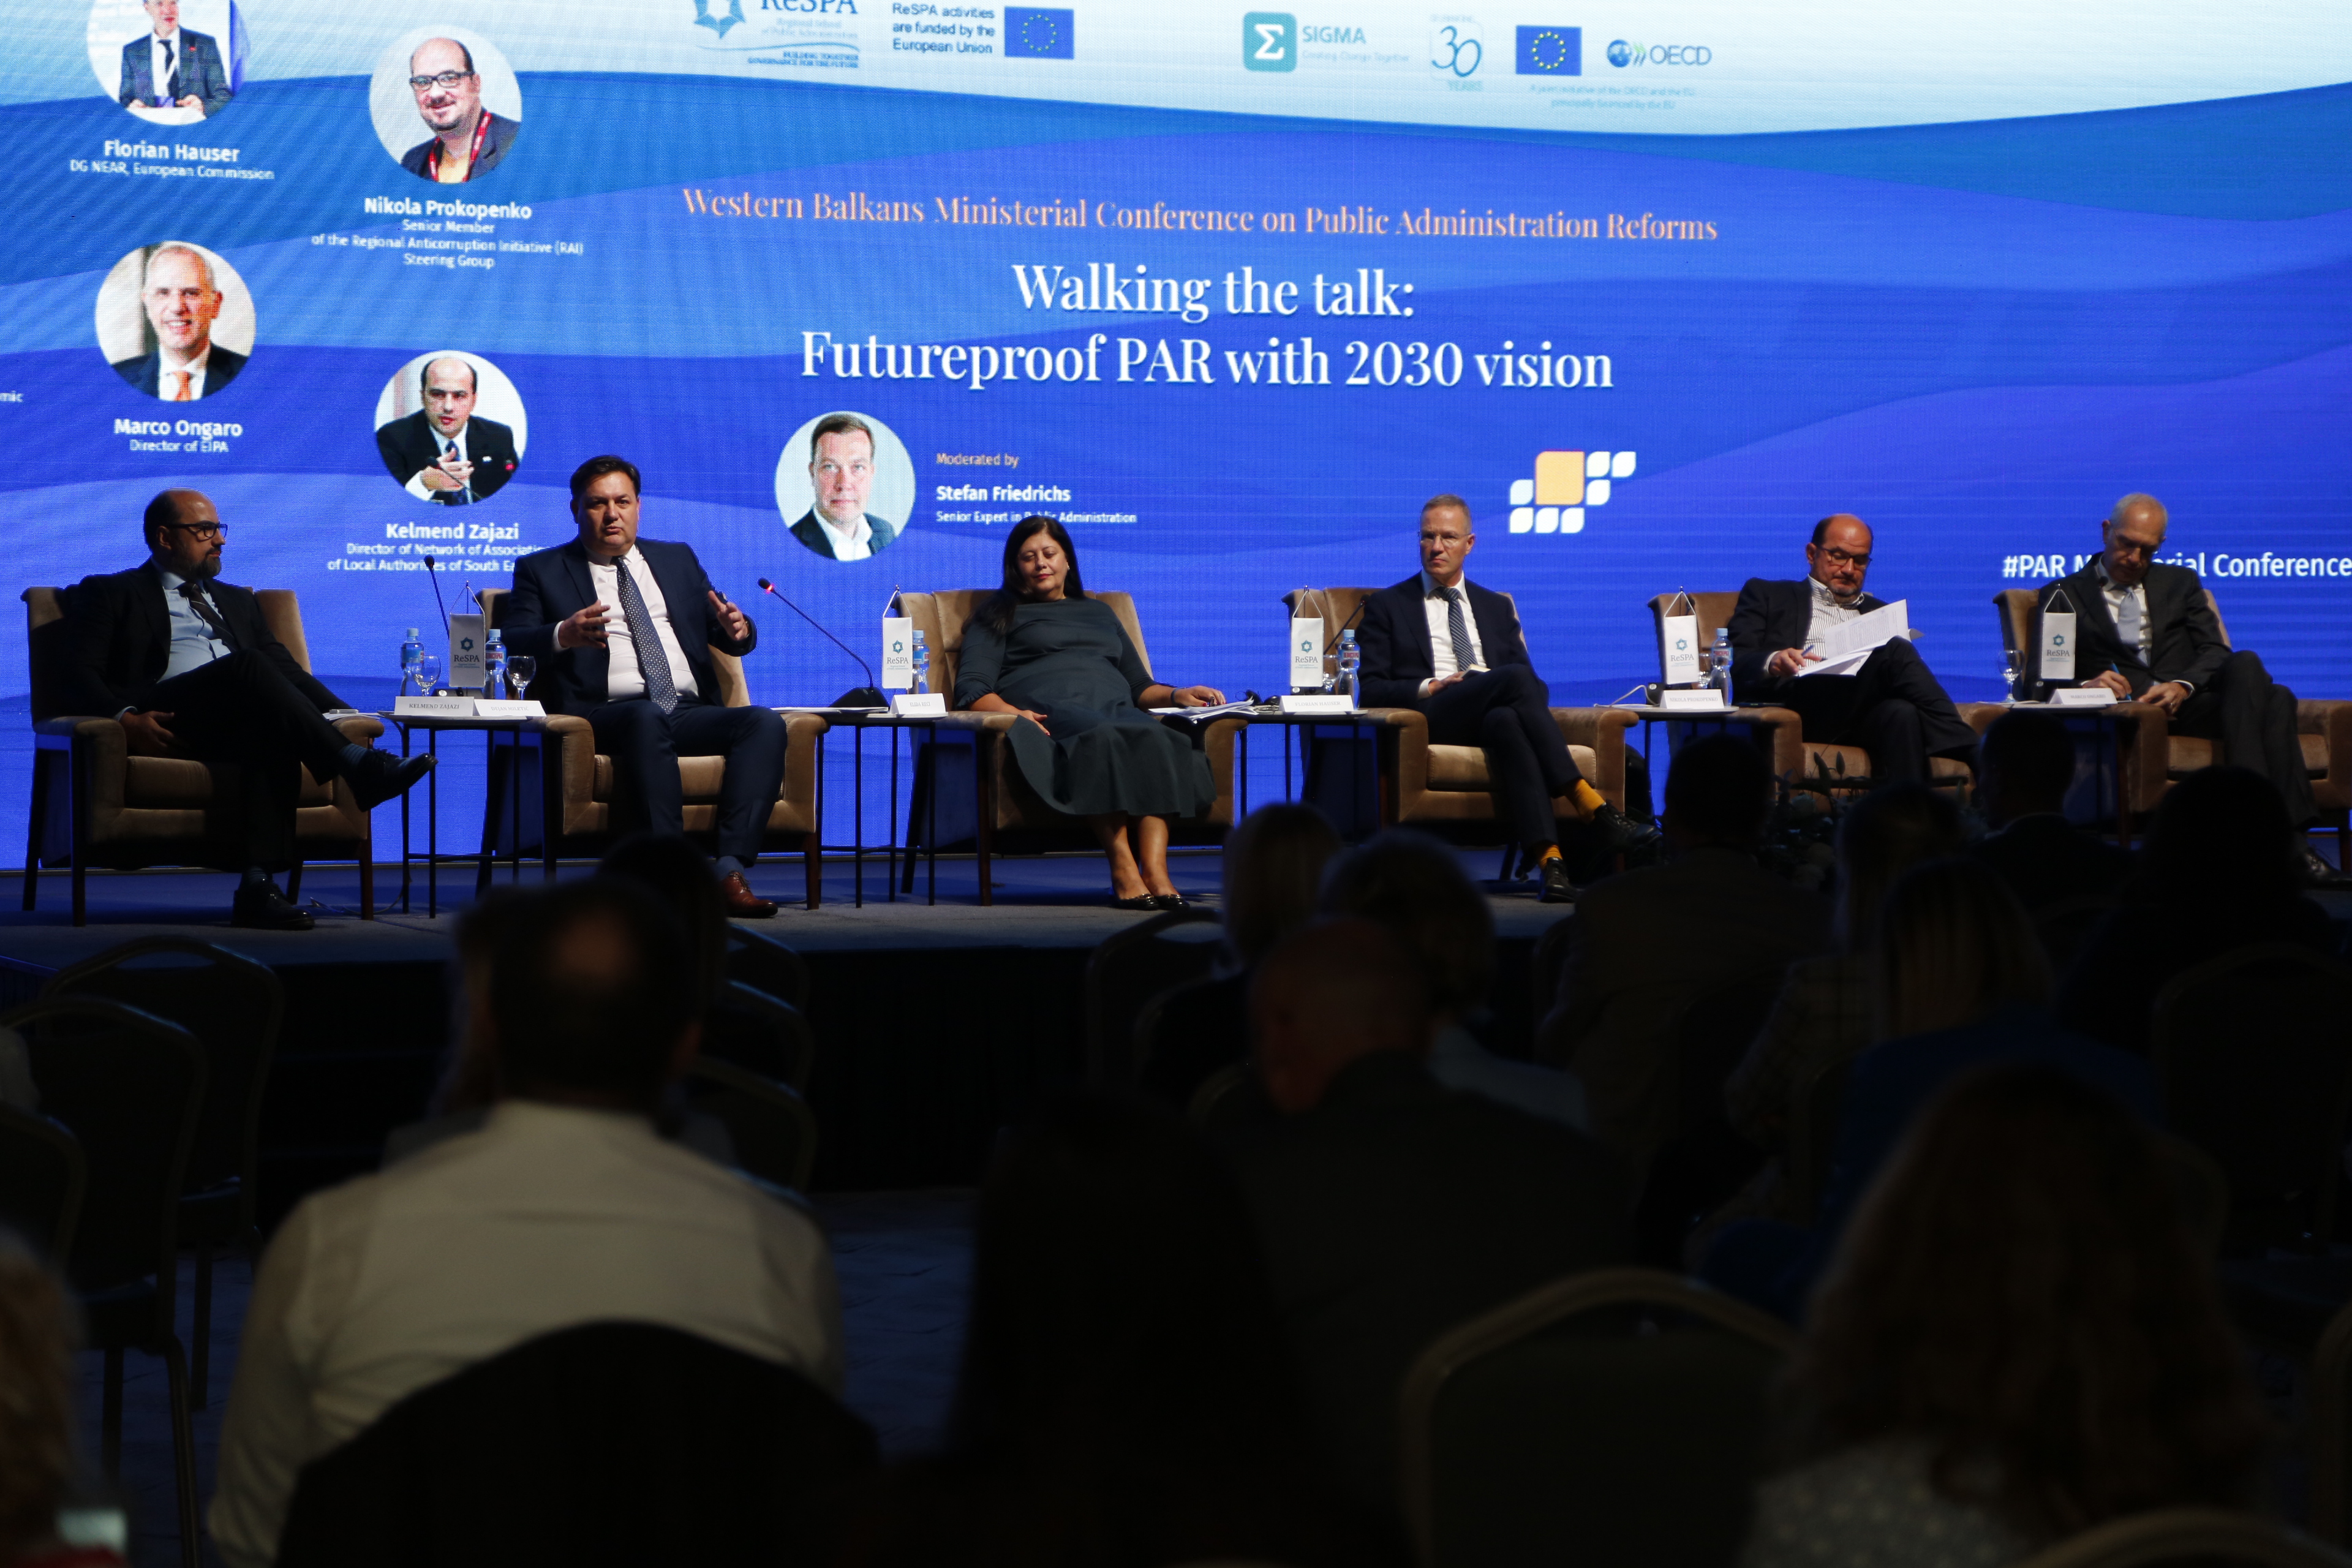 INNOVATION AS A STANDARD –ACCOMPLISHMENTS OF NAPA PRESENTED AT THE WESTERN BALKANS MINISTERIAL CONFERENCE IN SKOPJE